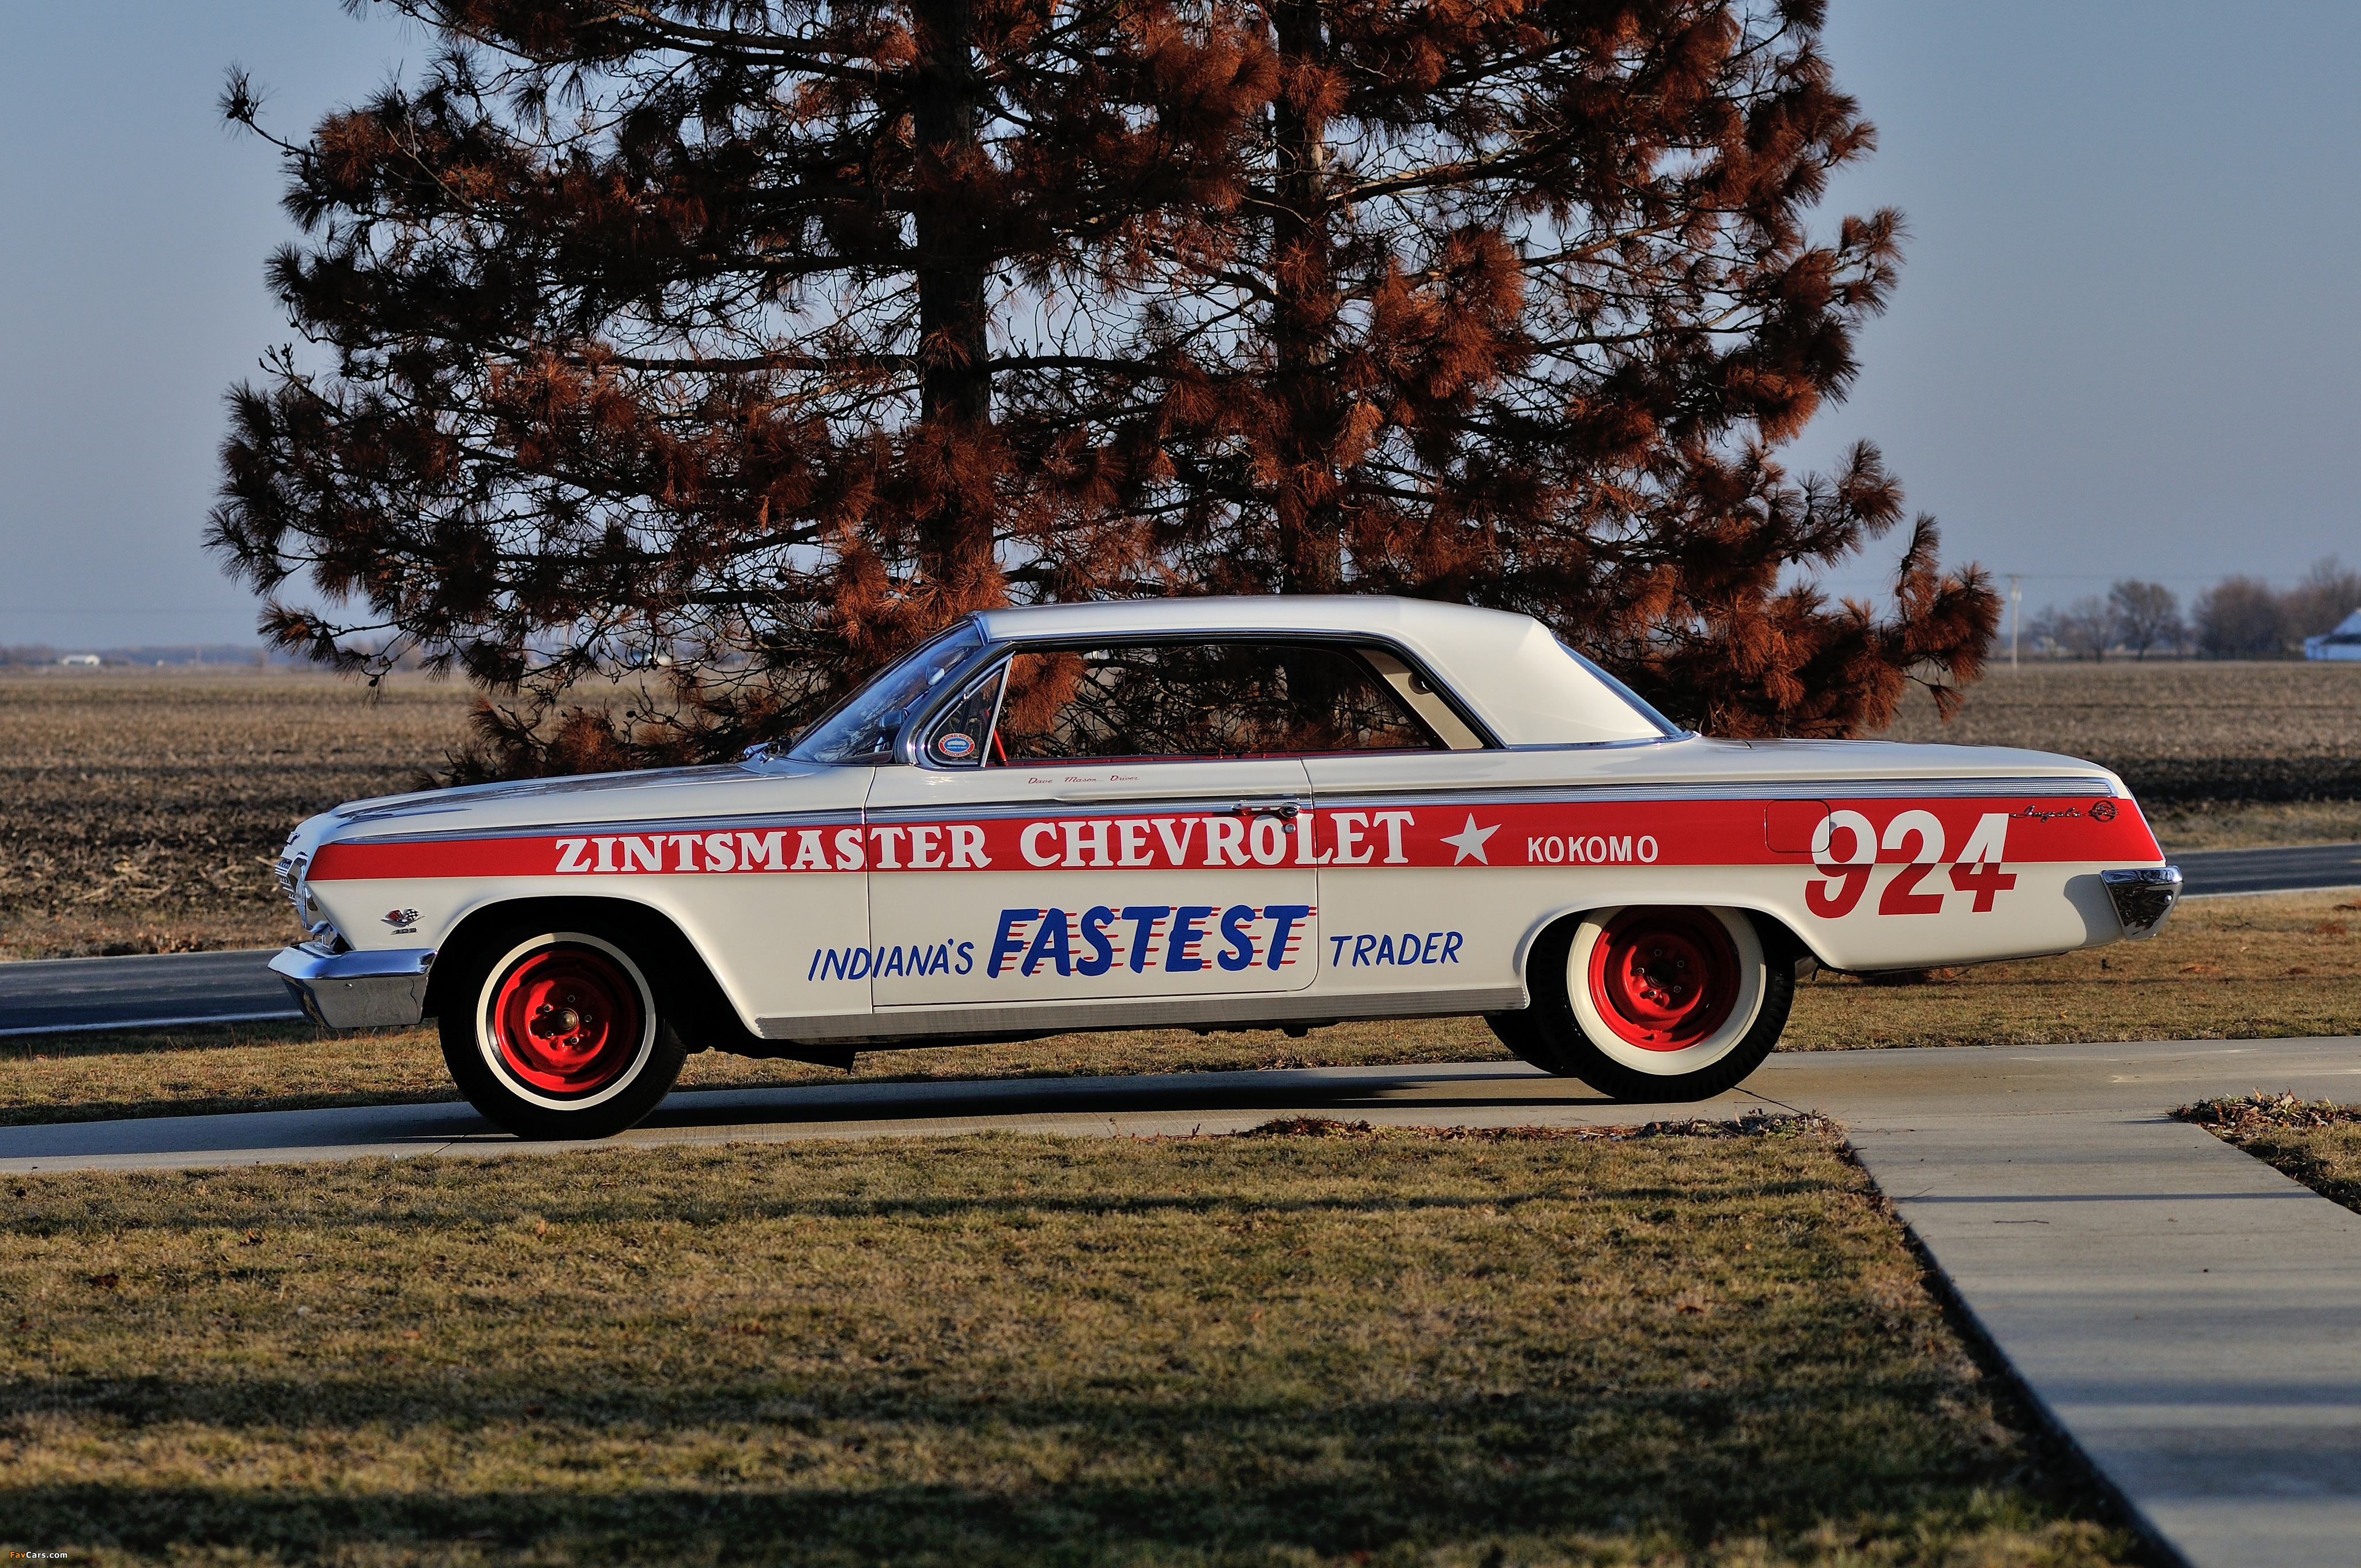 Chevrolet Impala SS 409 Lightweight Coupe (1847) 1962 images (4096 x 2720)